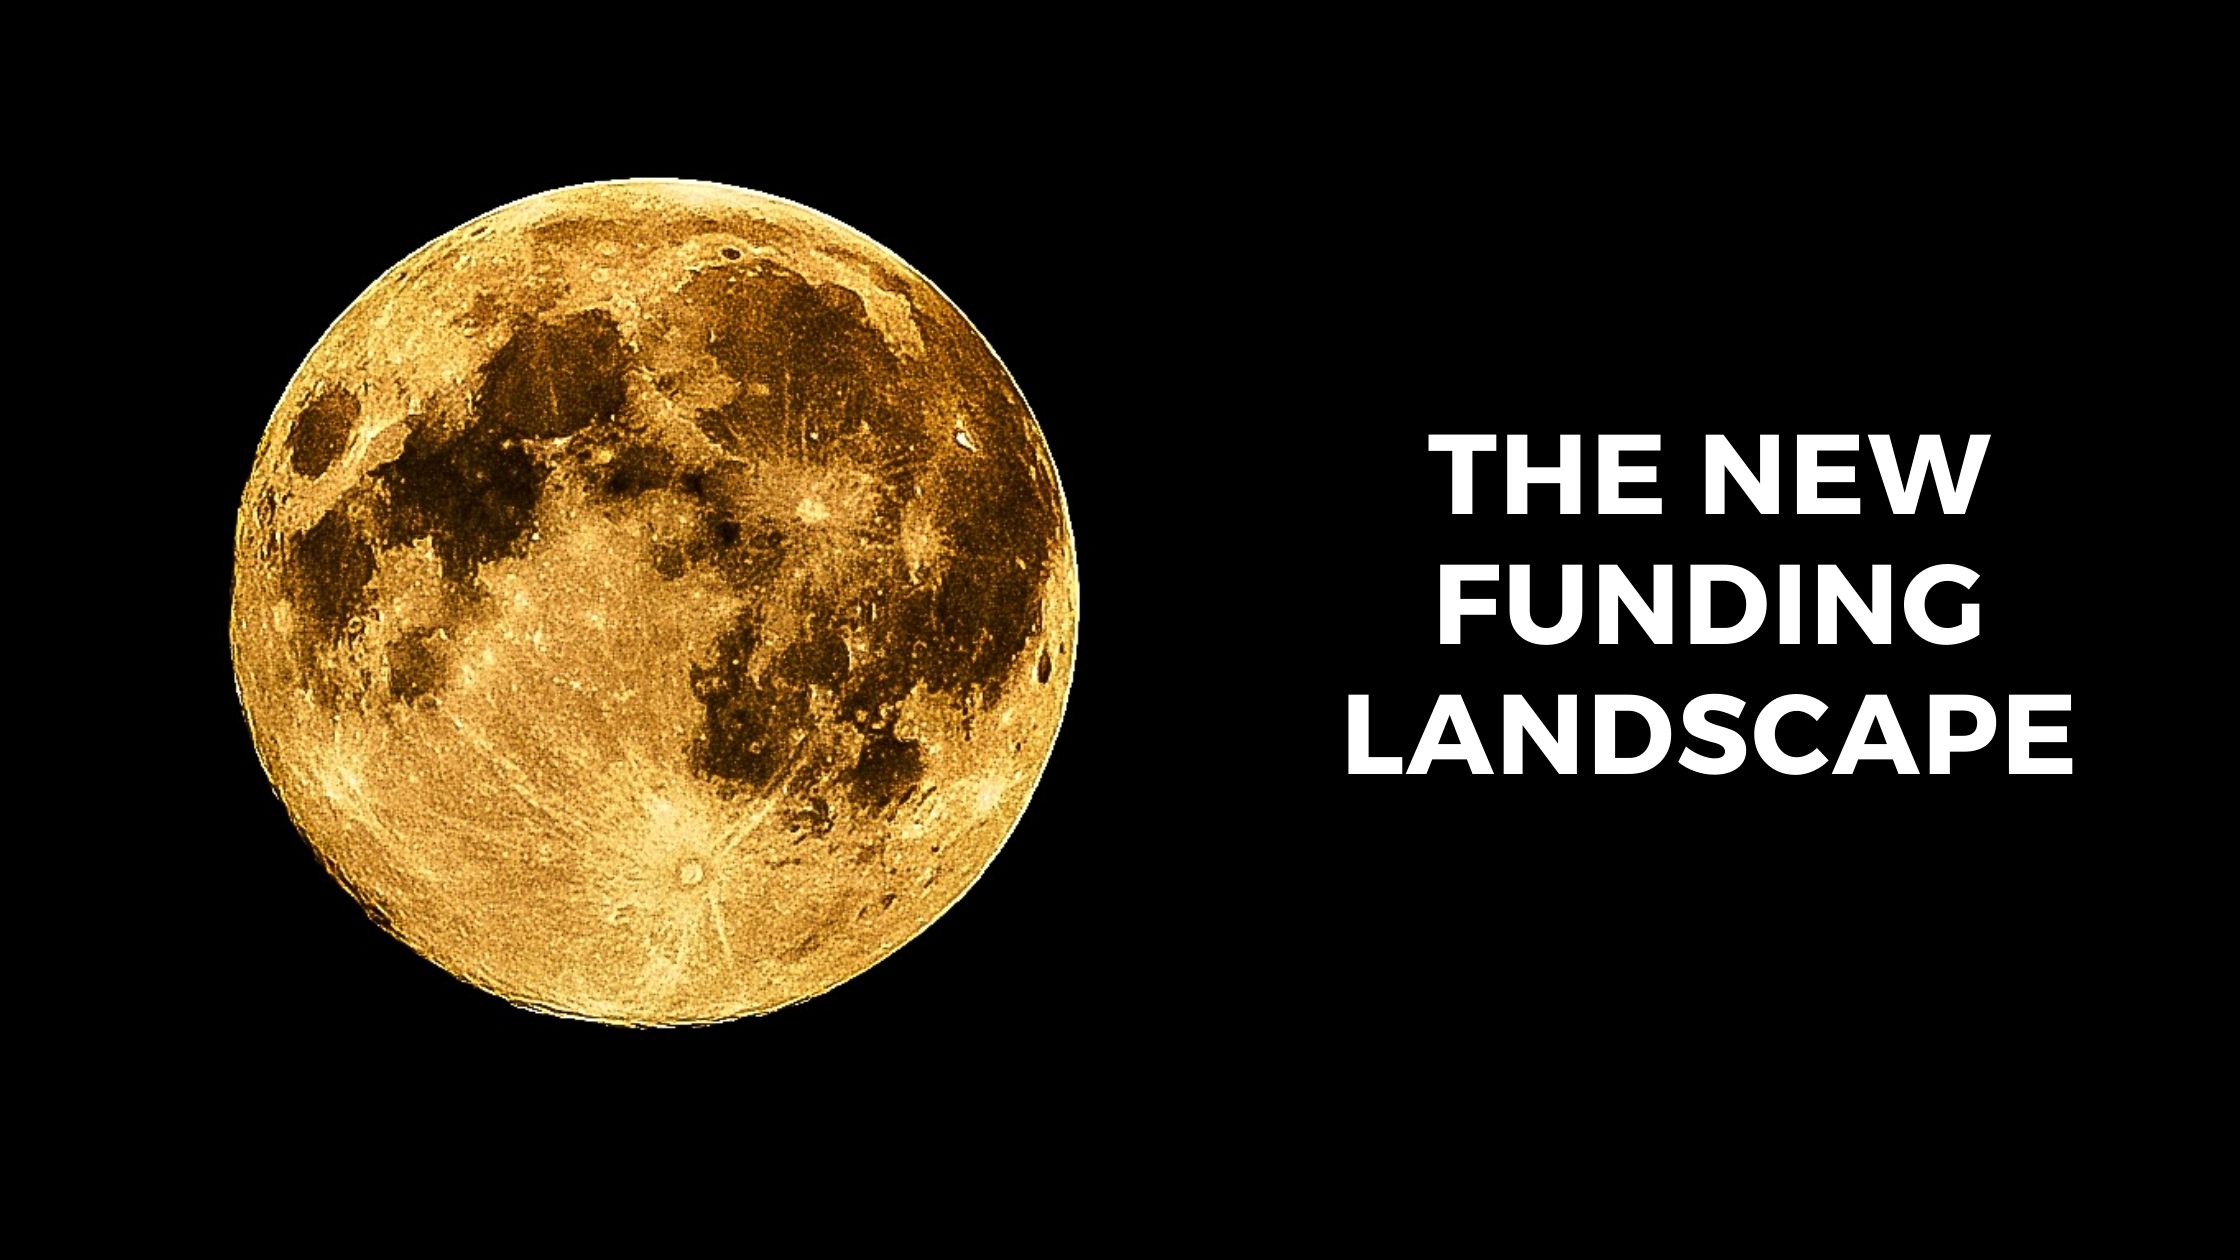 The new funding landscape